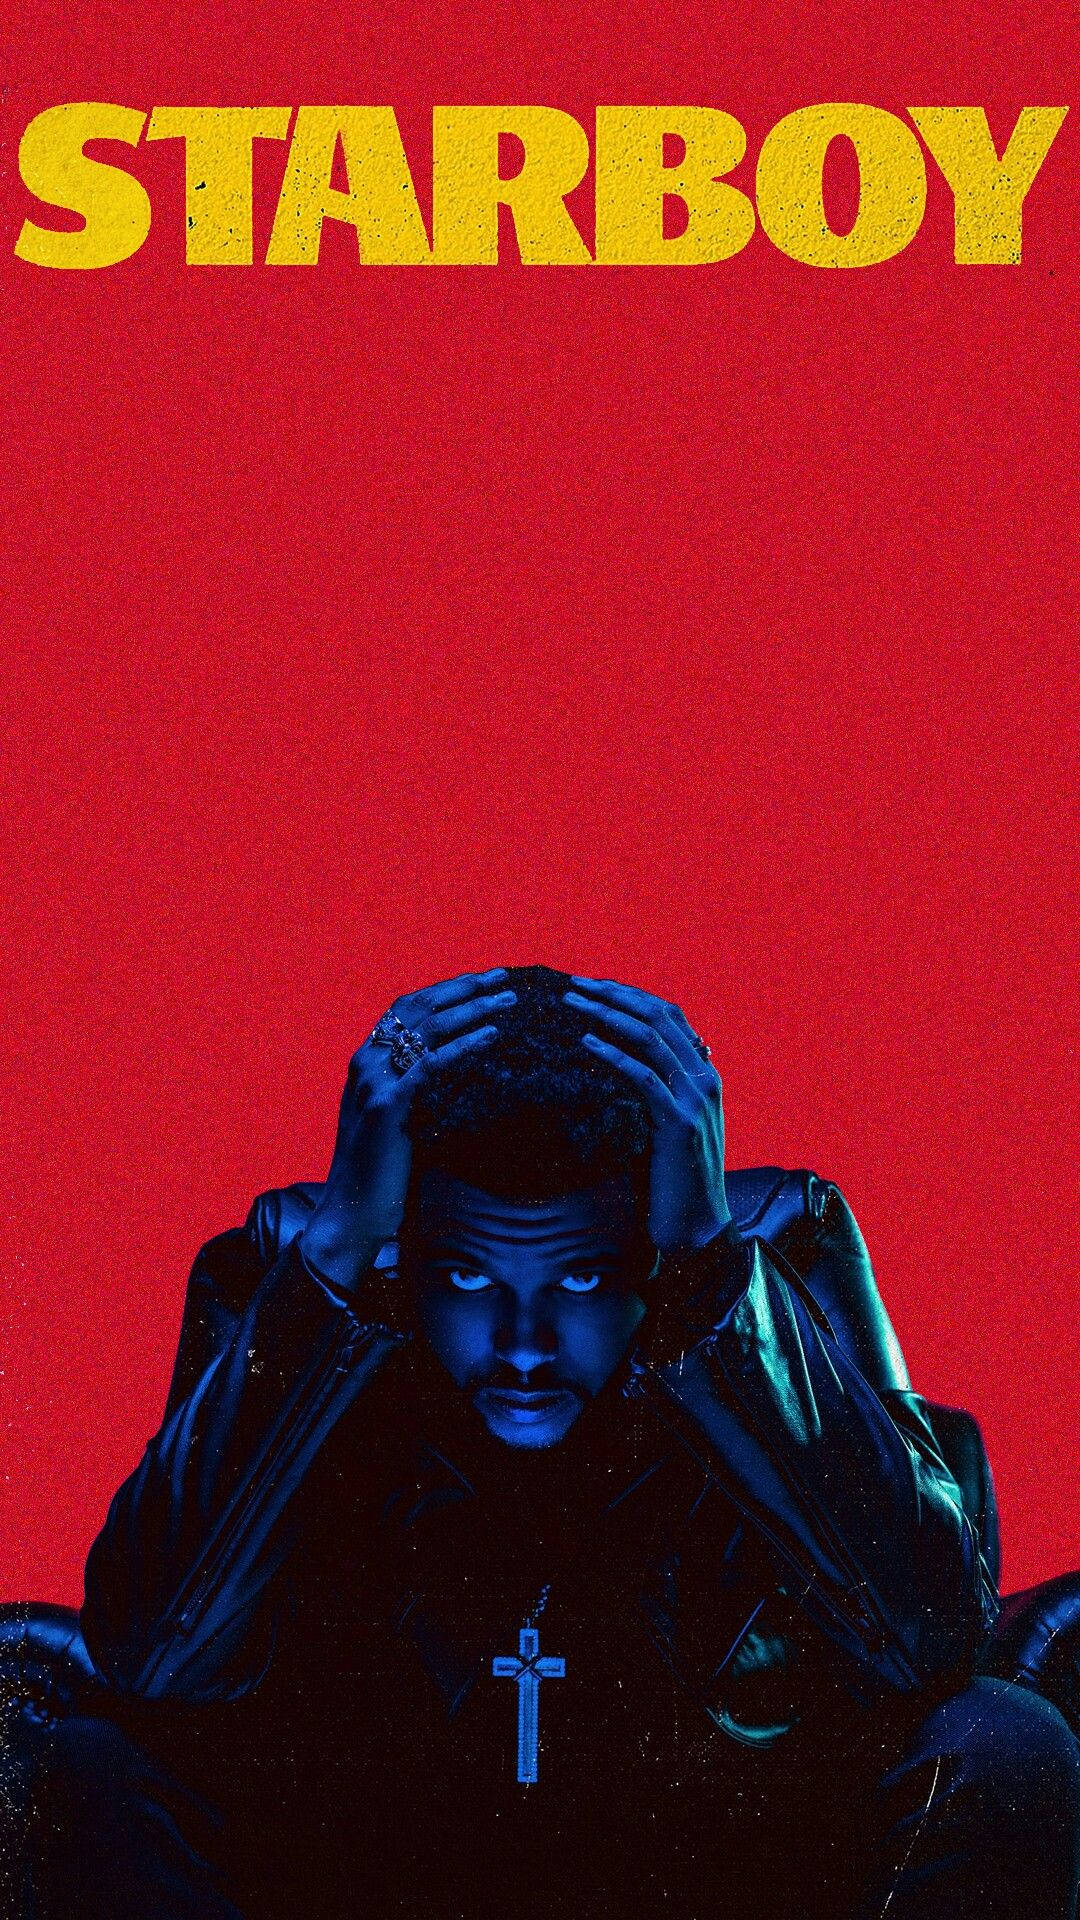 The Weeknd Starboy Cover Art Wallpaper